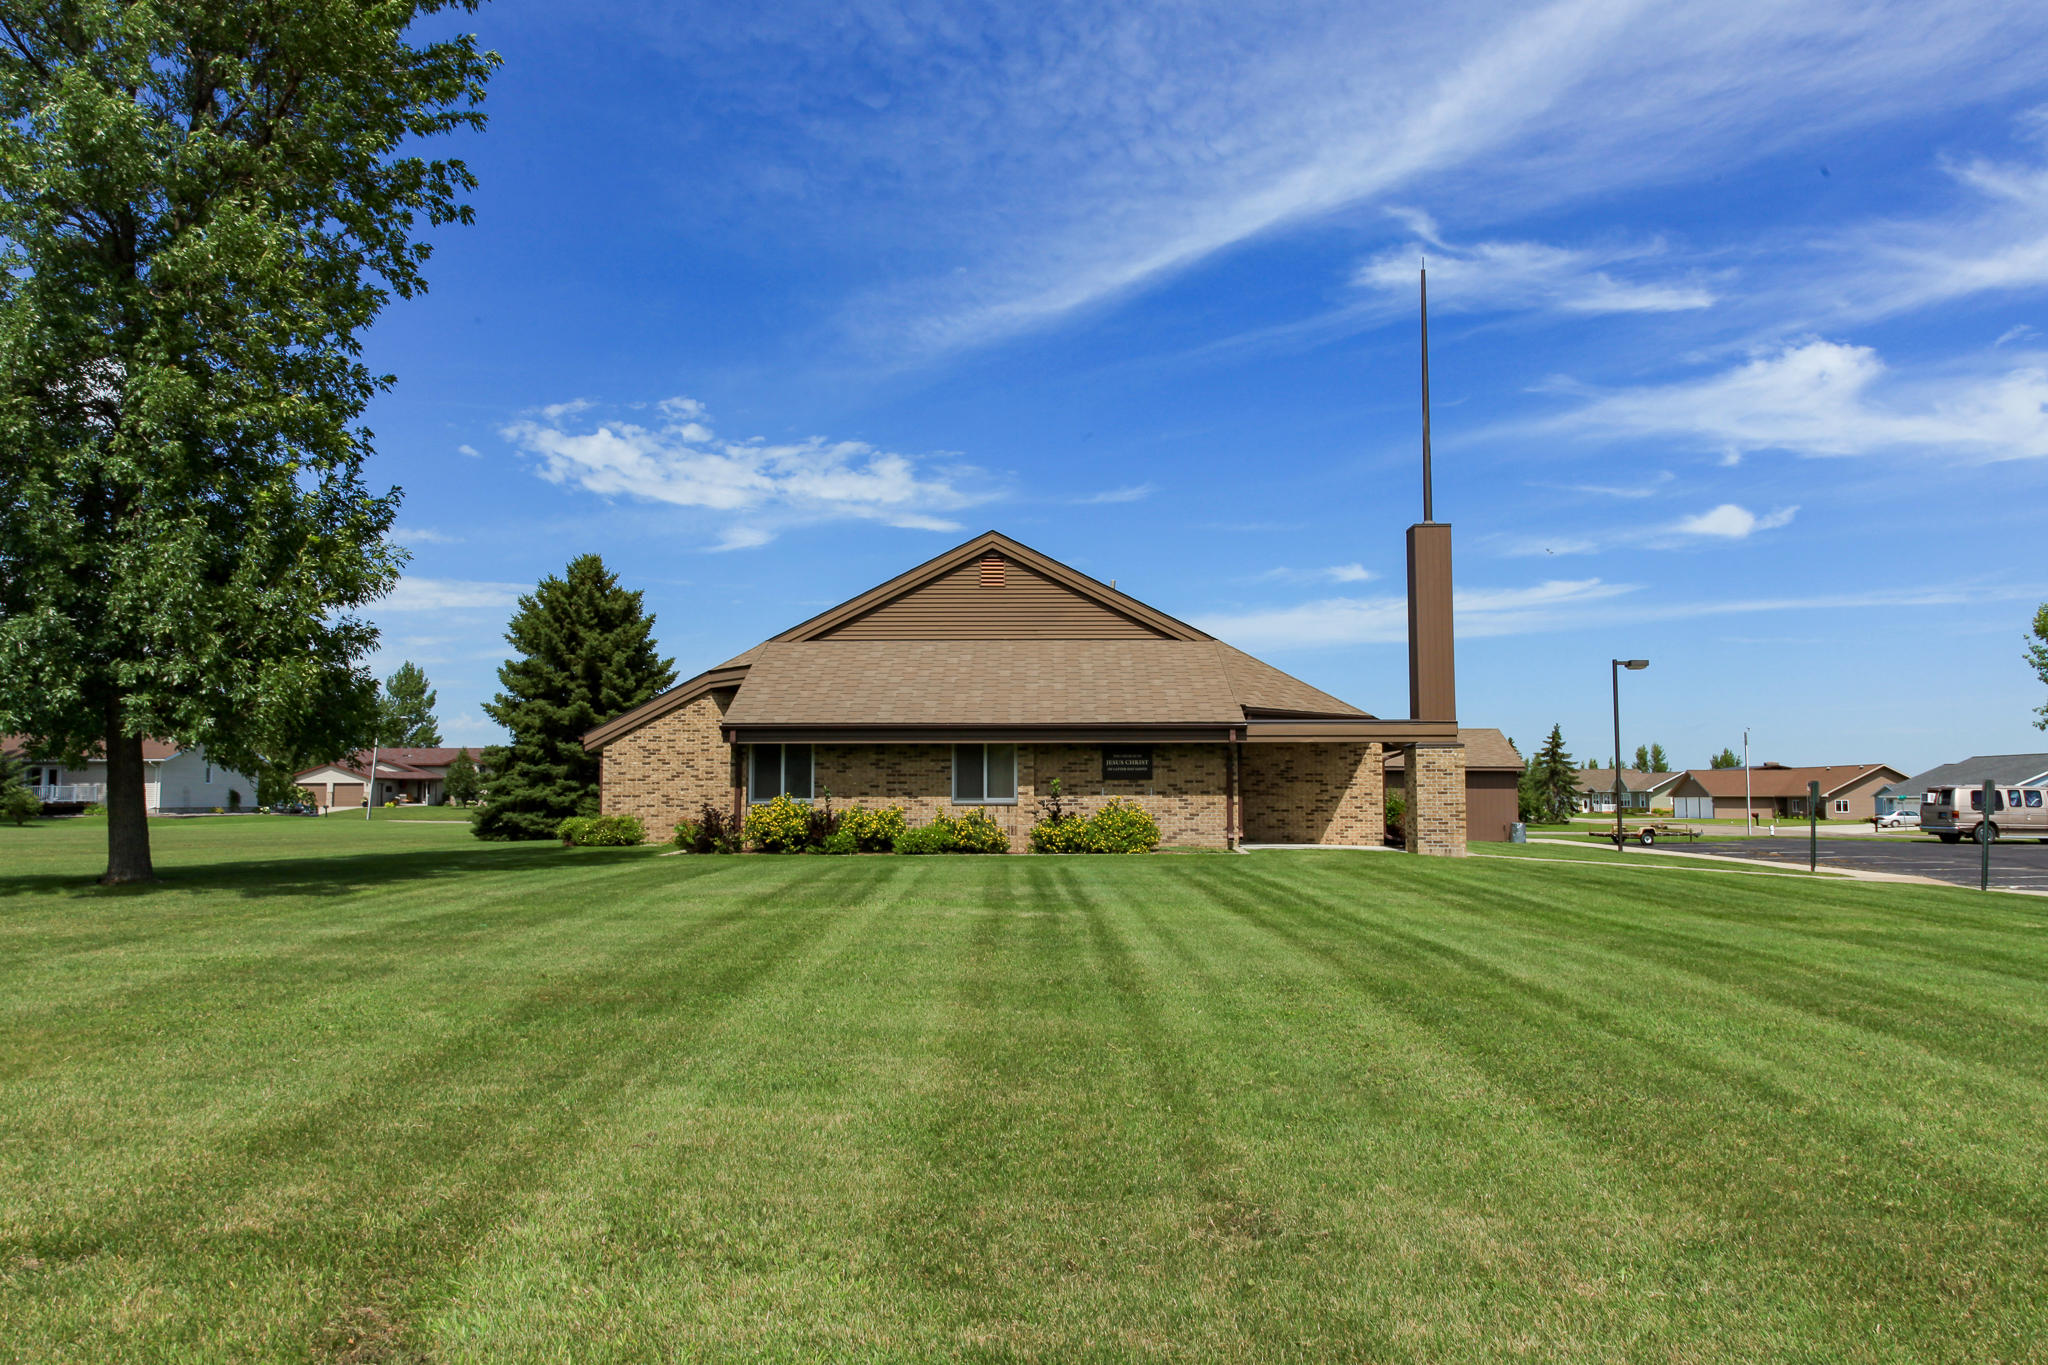 The Church of Jesus Christ of Latter-day Saints, Devils Lake ND 58301-1615